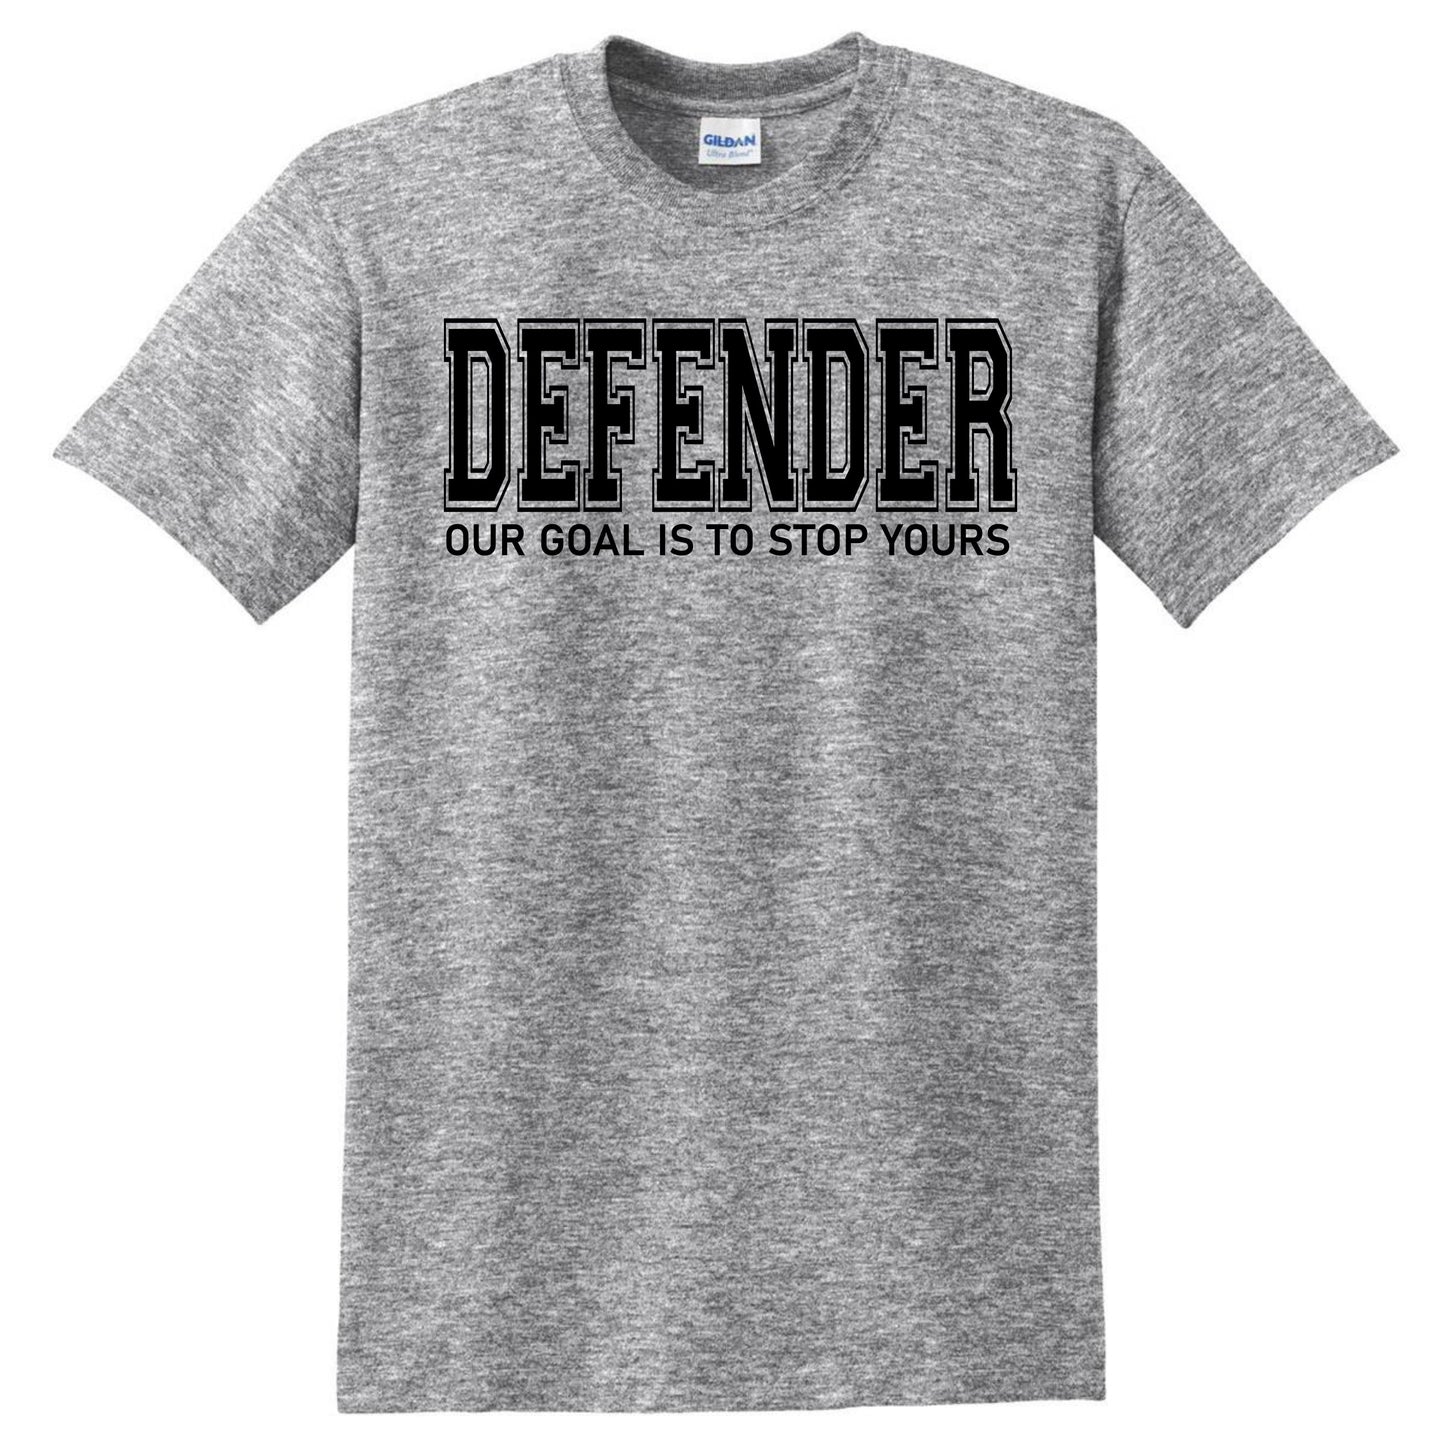 soccer defenders t shirt, our goal is to stop yours